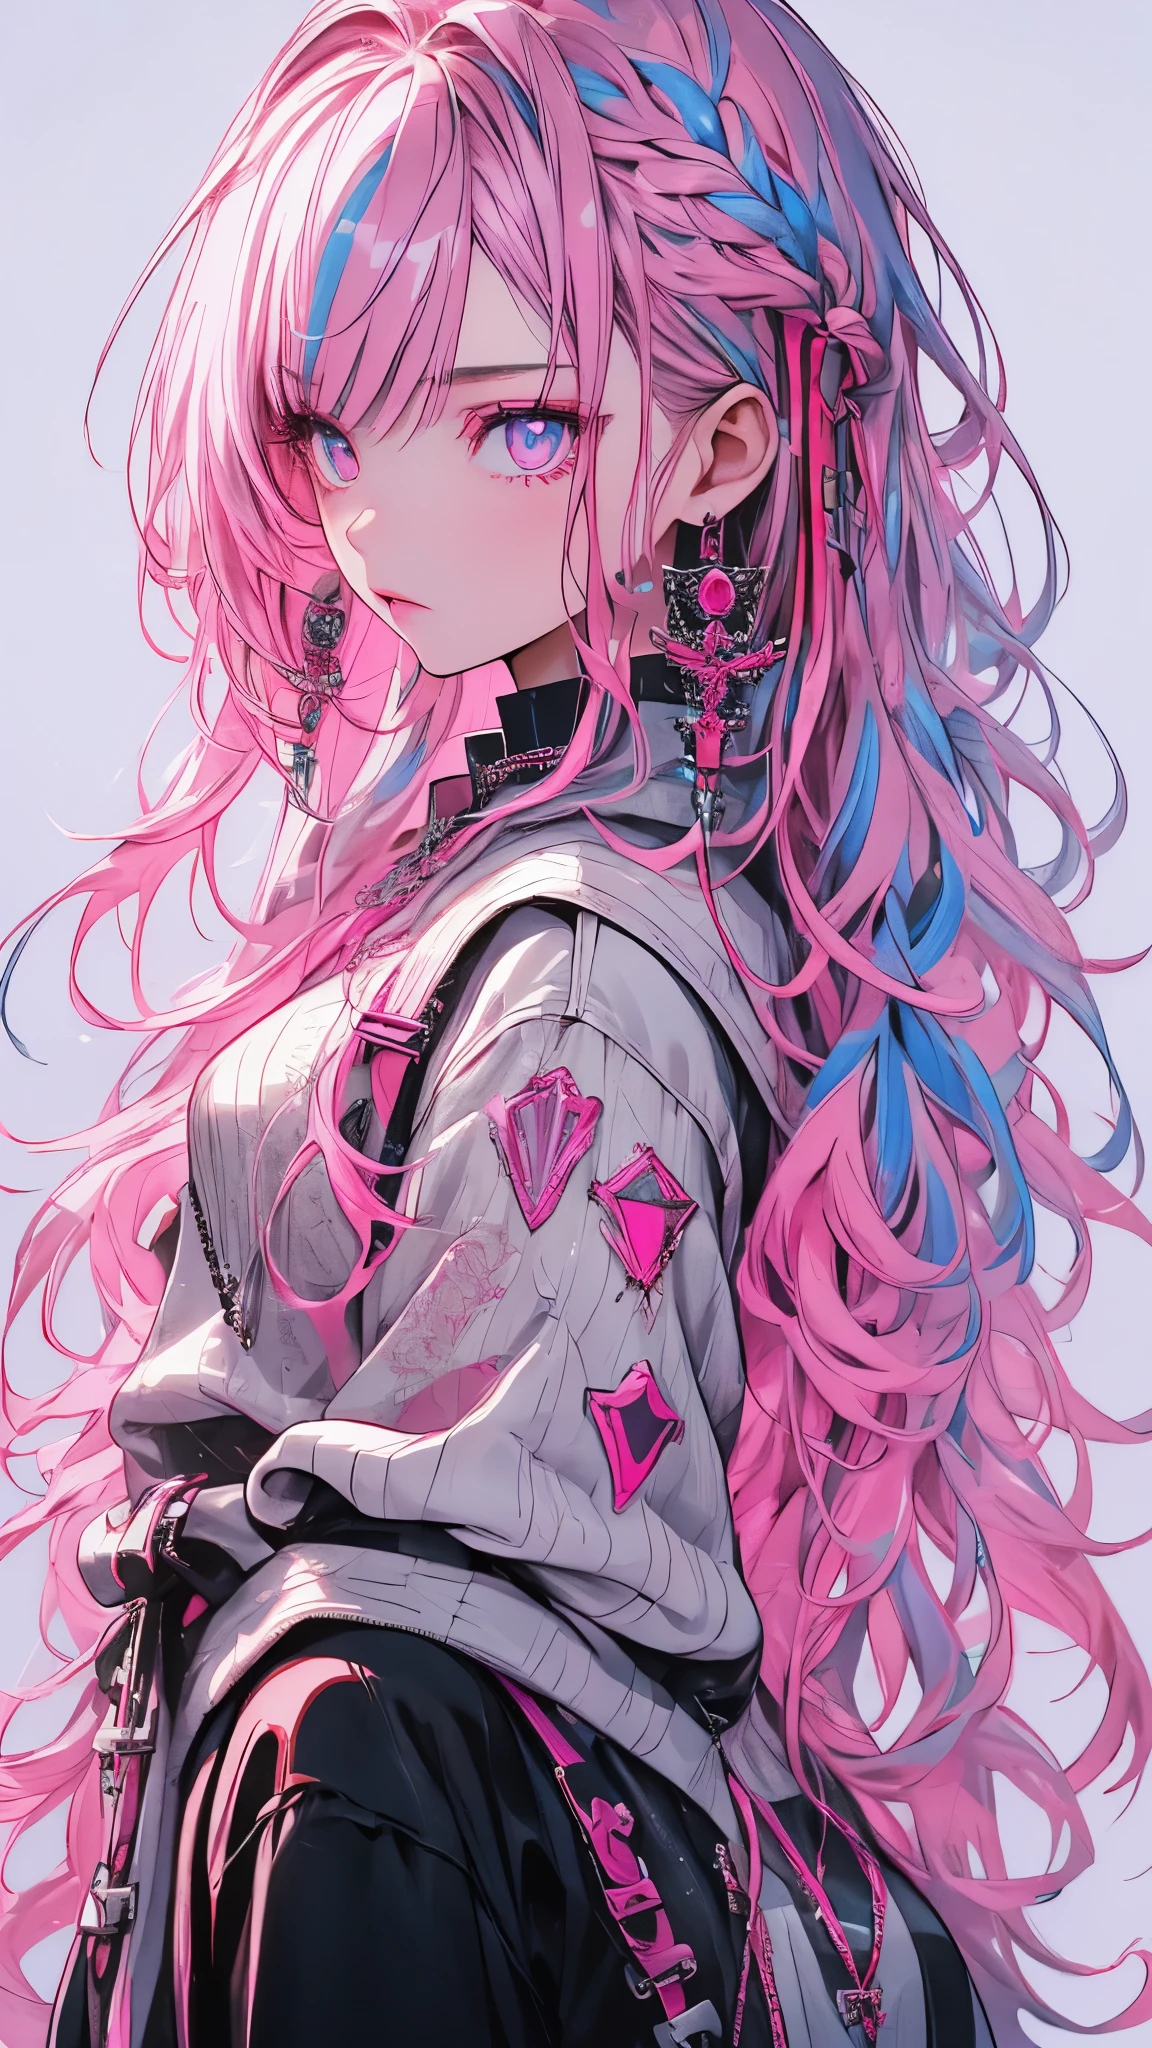 Hongliu, 1 girl, alone, long hair, looking at the viewer, blue eyes background, white background, jewelry, closed mouth, Jacket, Upper body, pink hair, earrings, pink eyes, necklace, From the side, sweater, lips, eyelash, compensate, wavy hair, earrings, cross, lipstick, ear earrings, eye shadow, hoop earrings, pink lips, multicolored eyes, pink theme, , pink eye shadow,